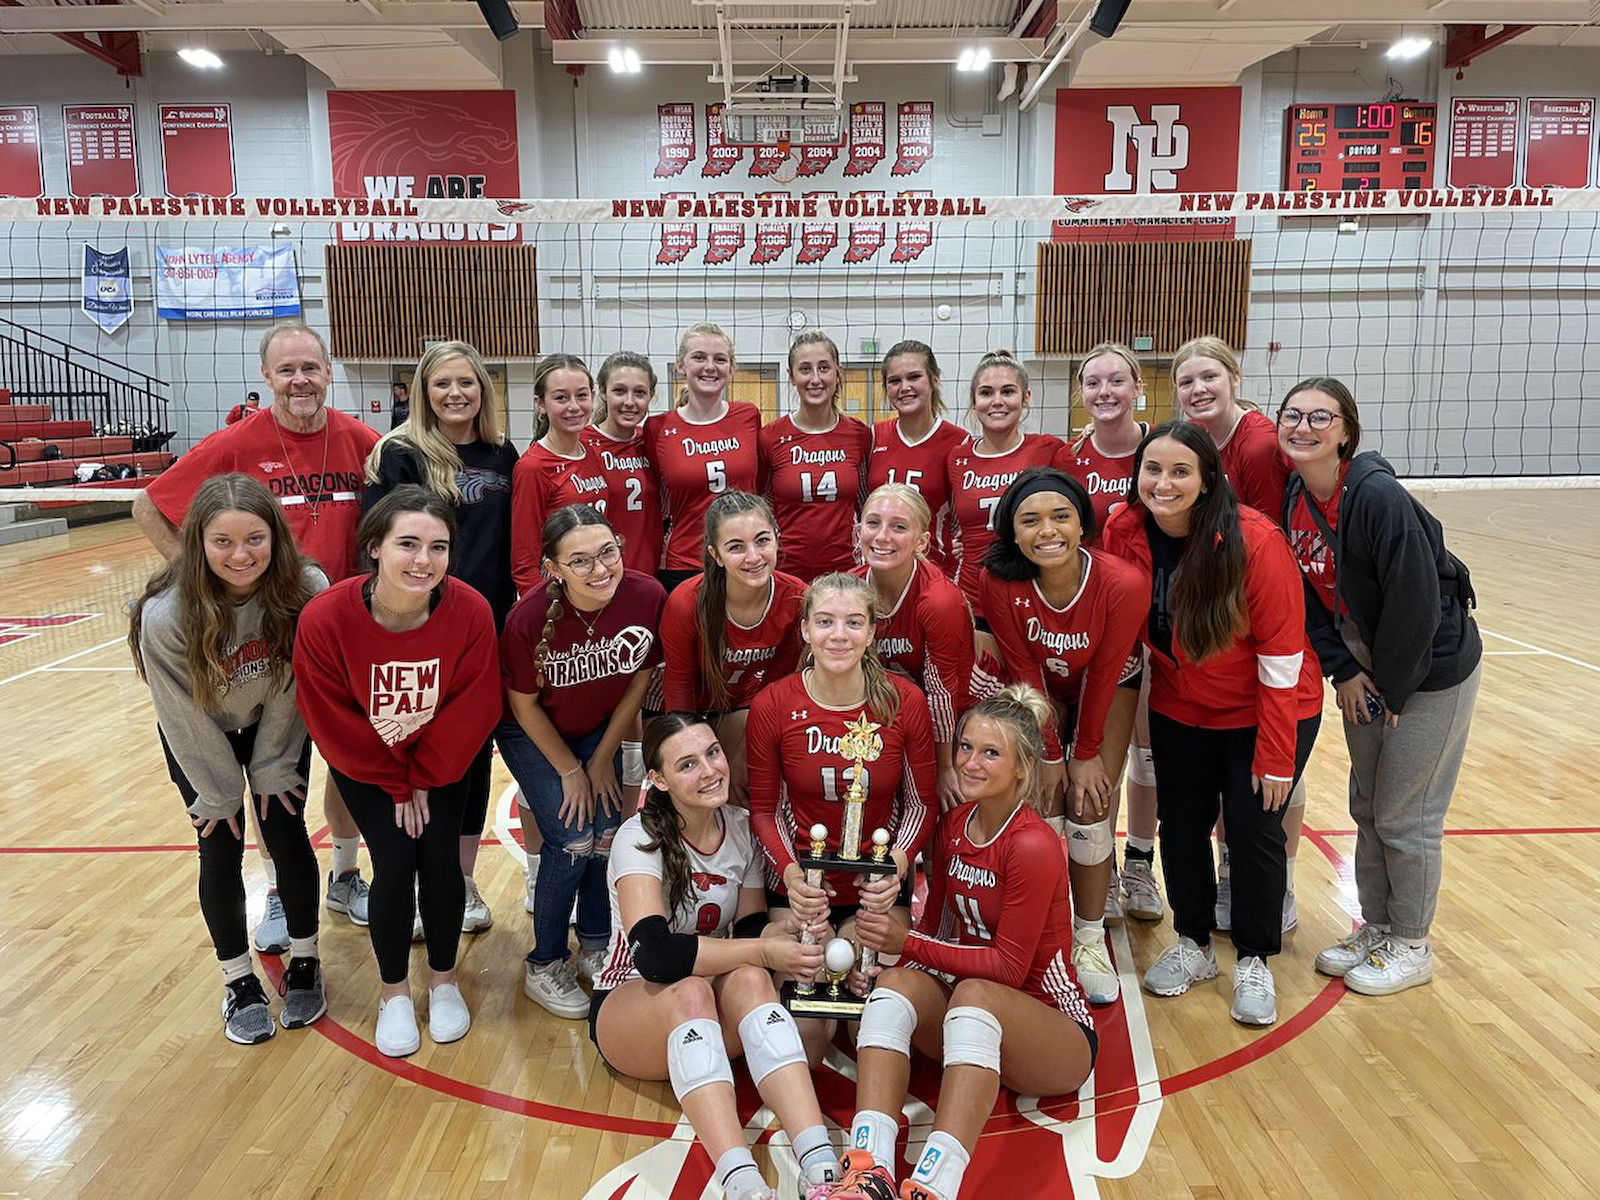 Volleyball wins New Palestine Invitational cover photo